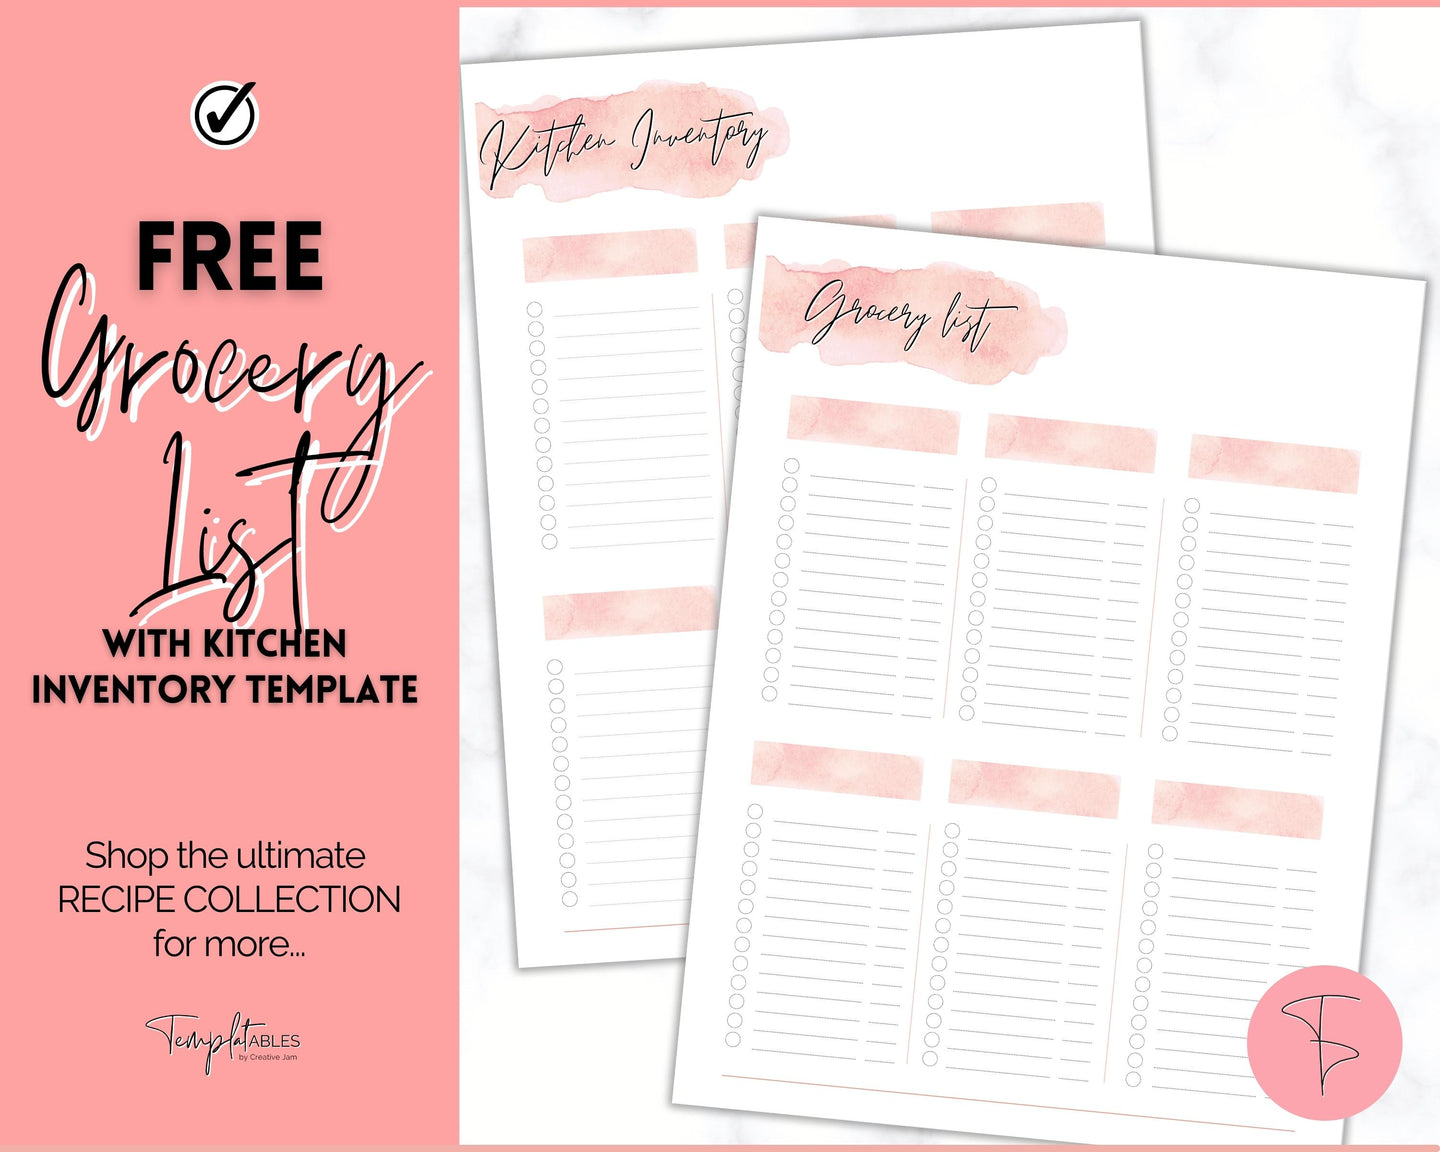 FREE - Grocery List Printable, Weekly Shopping List, Meal Planner Checklist, Kitchen Organization Template | Pink Watercolor